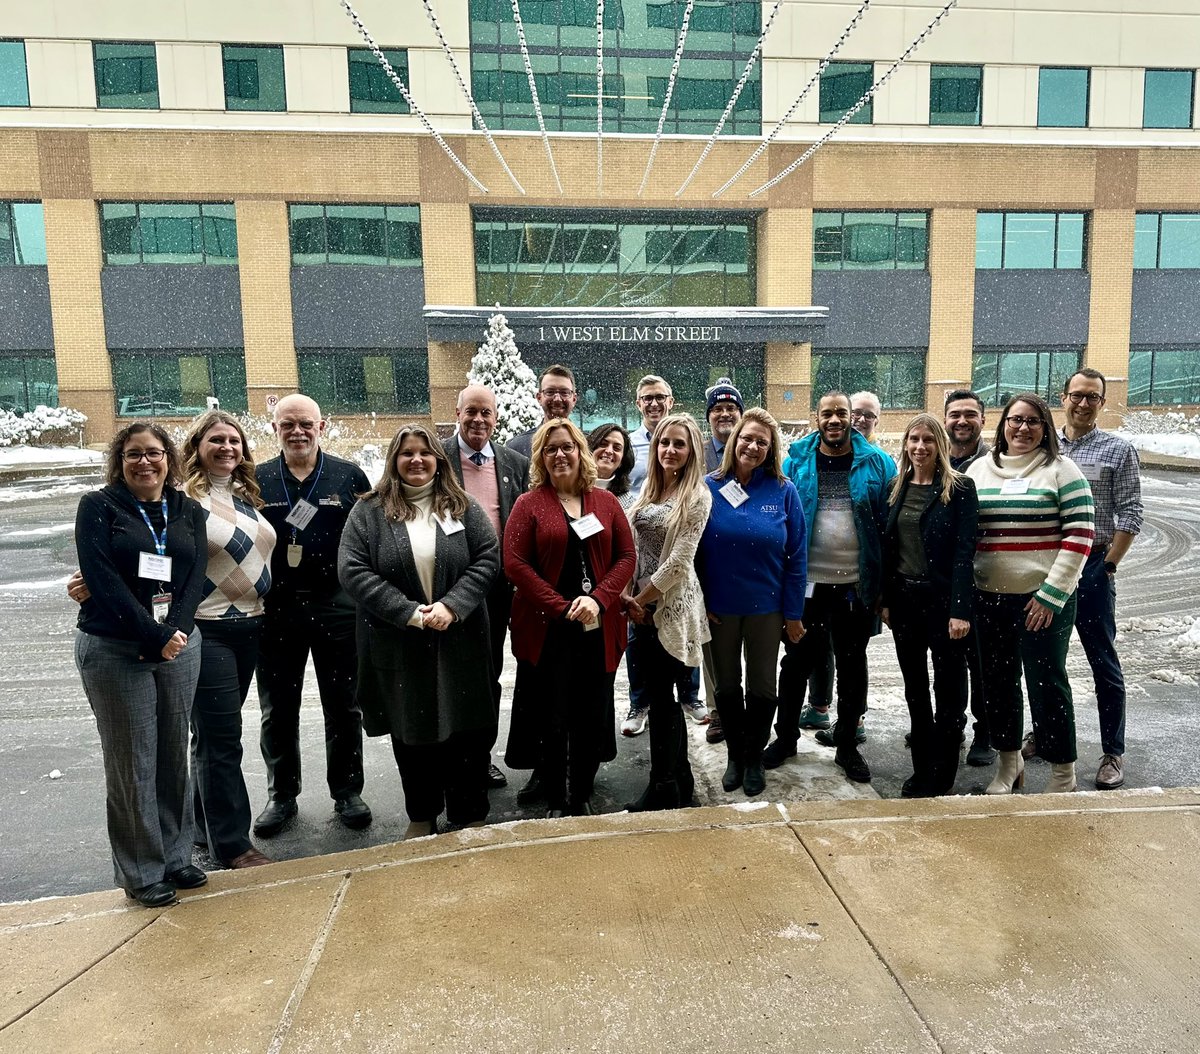 Fun in the snow and #DOproud to work with great colleagues from across the country preparing for #C3DO for #osteopathic clinical skills assessment! @ATSU_news @MarianUniv @TCOM_UNTHSC @mwuazcom @RowanVirtuaSOM @acheedu @campbell__med @unetweets @AACOMmunities @AOAforDOs @NBOME